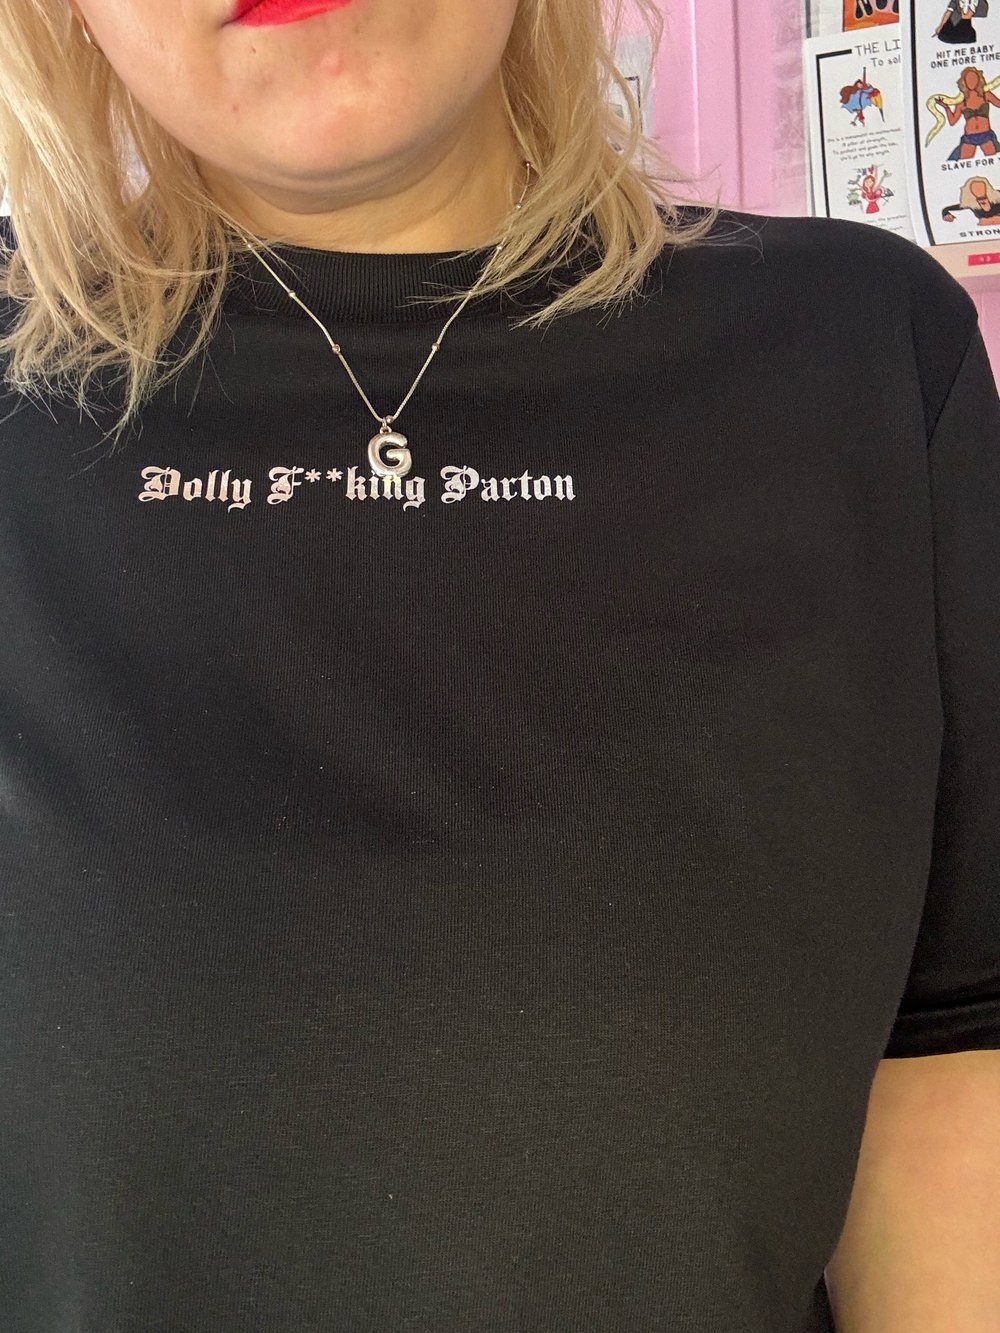 Image of Dolly F**king Parton tee